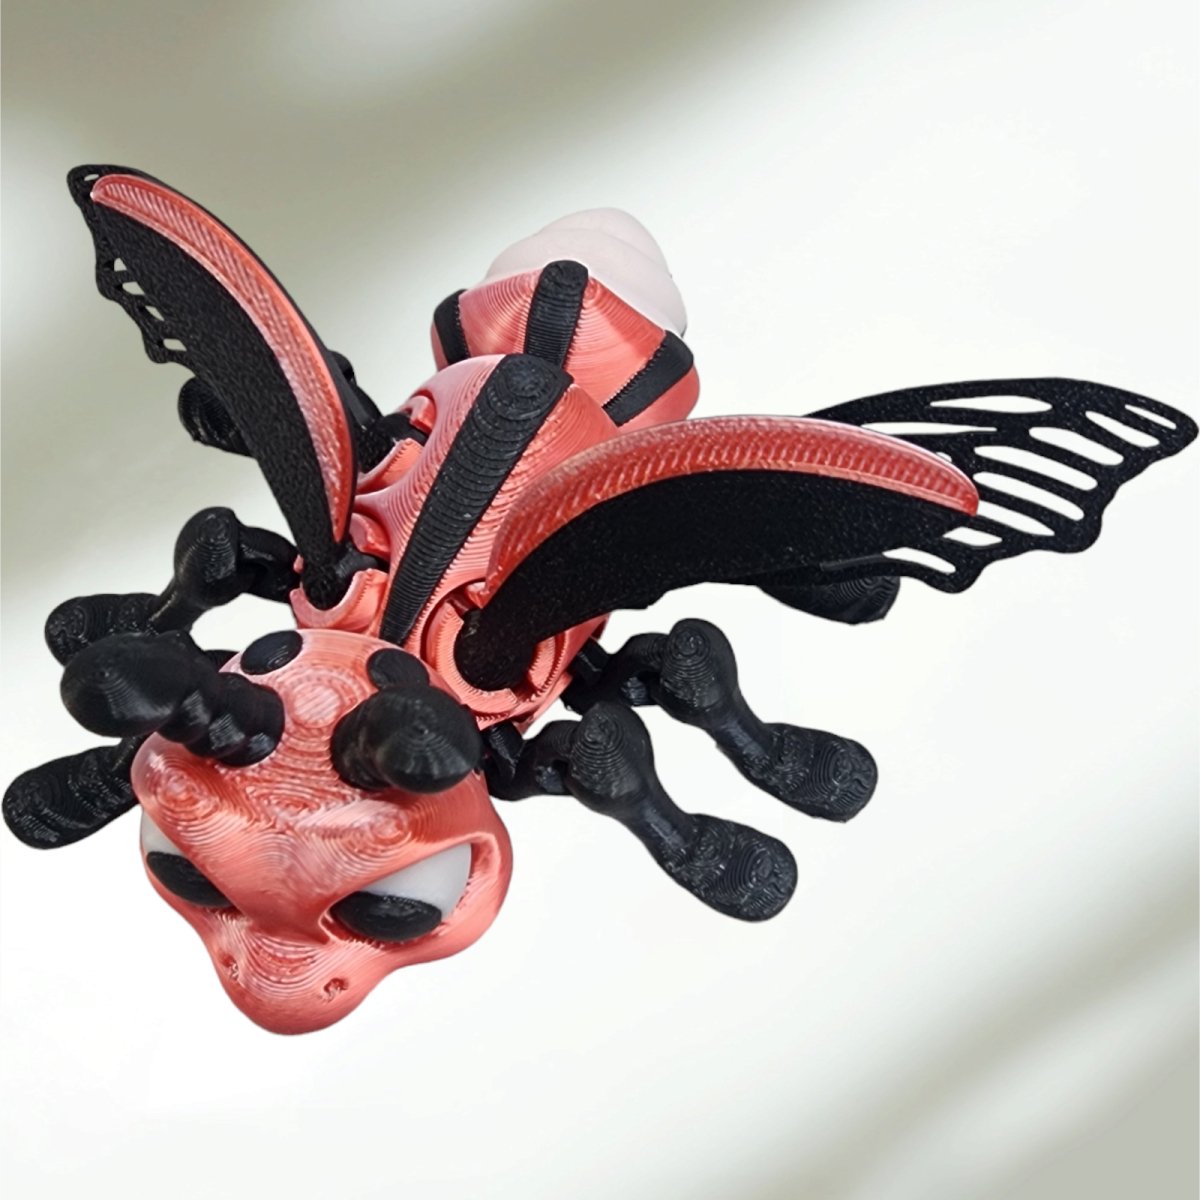 Sparky the FireFly feature intricate designs and bright colors 3D Print - Hats Signs Patches 3D printing Engraving